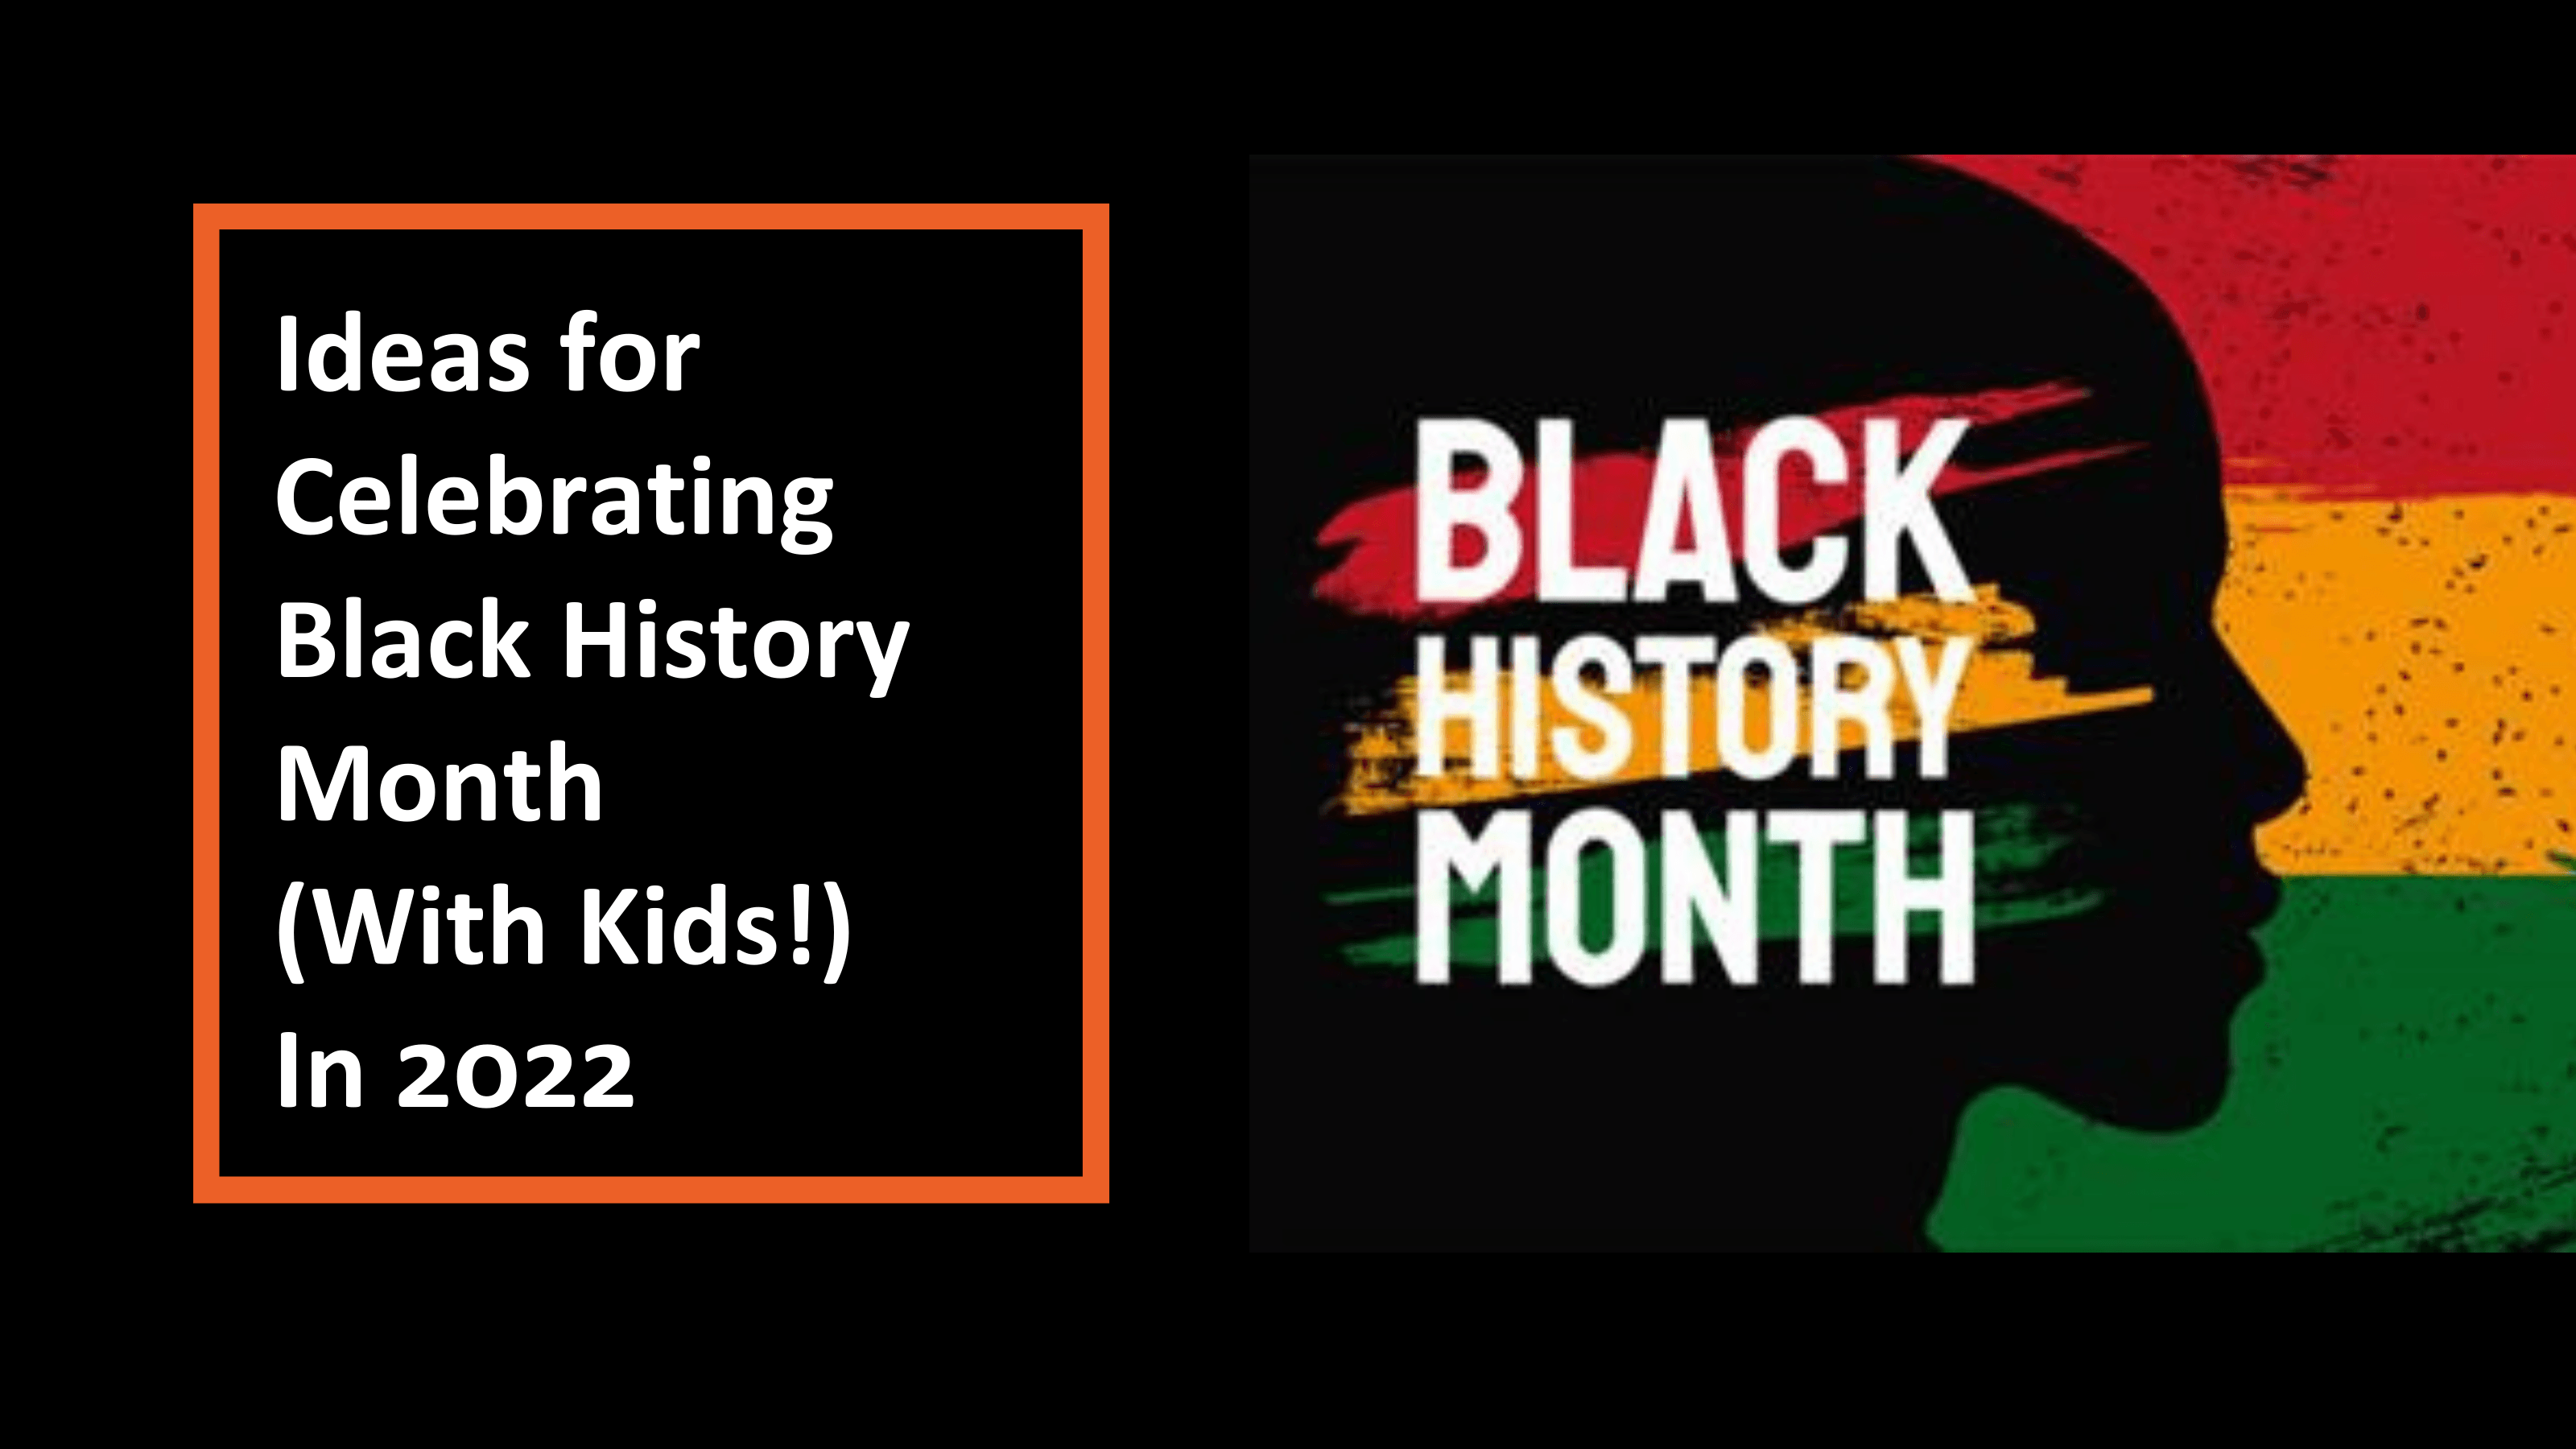 Ideas for Celebrating Black History Month (With Kids!) In 2022